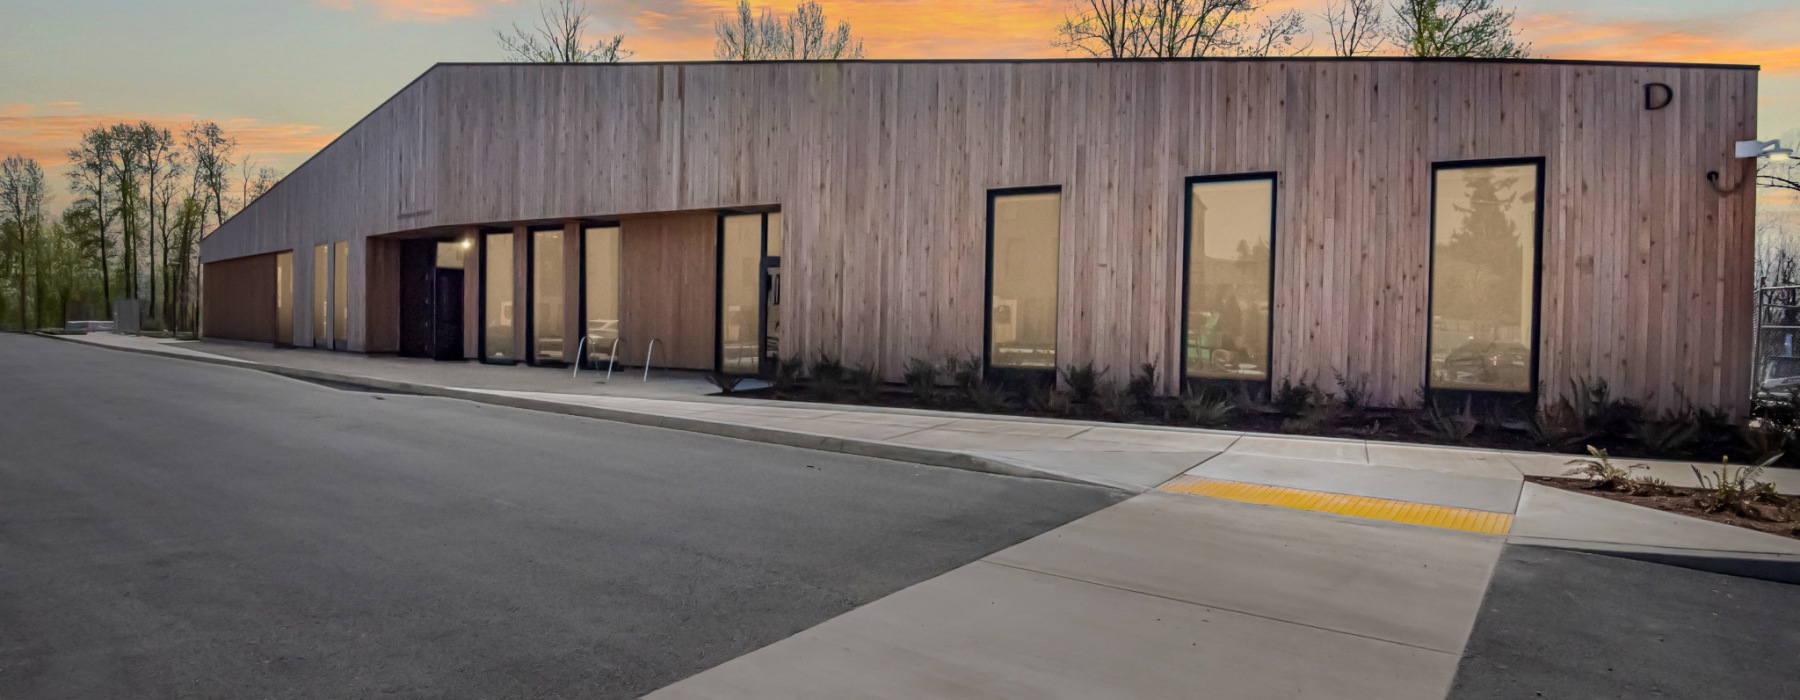 Exterior view of the lobby and leasing office at sunset